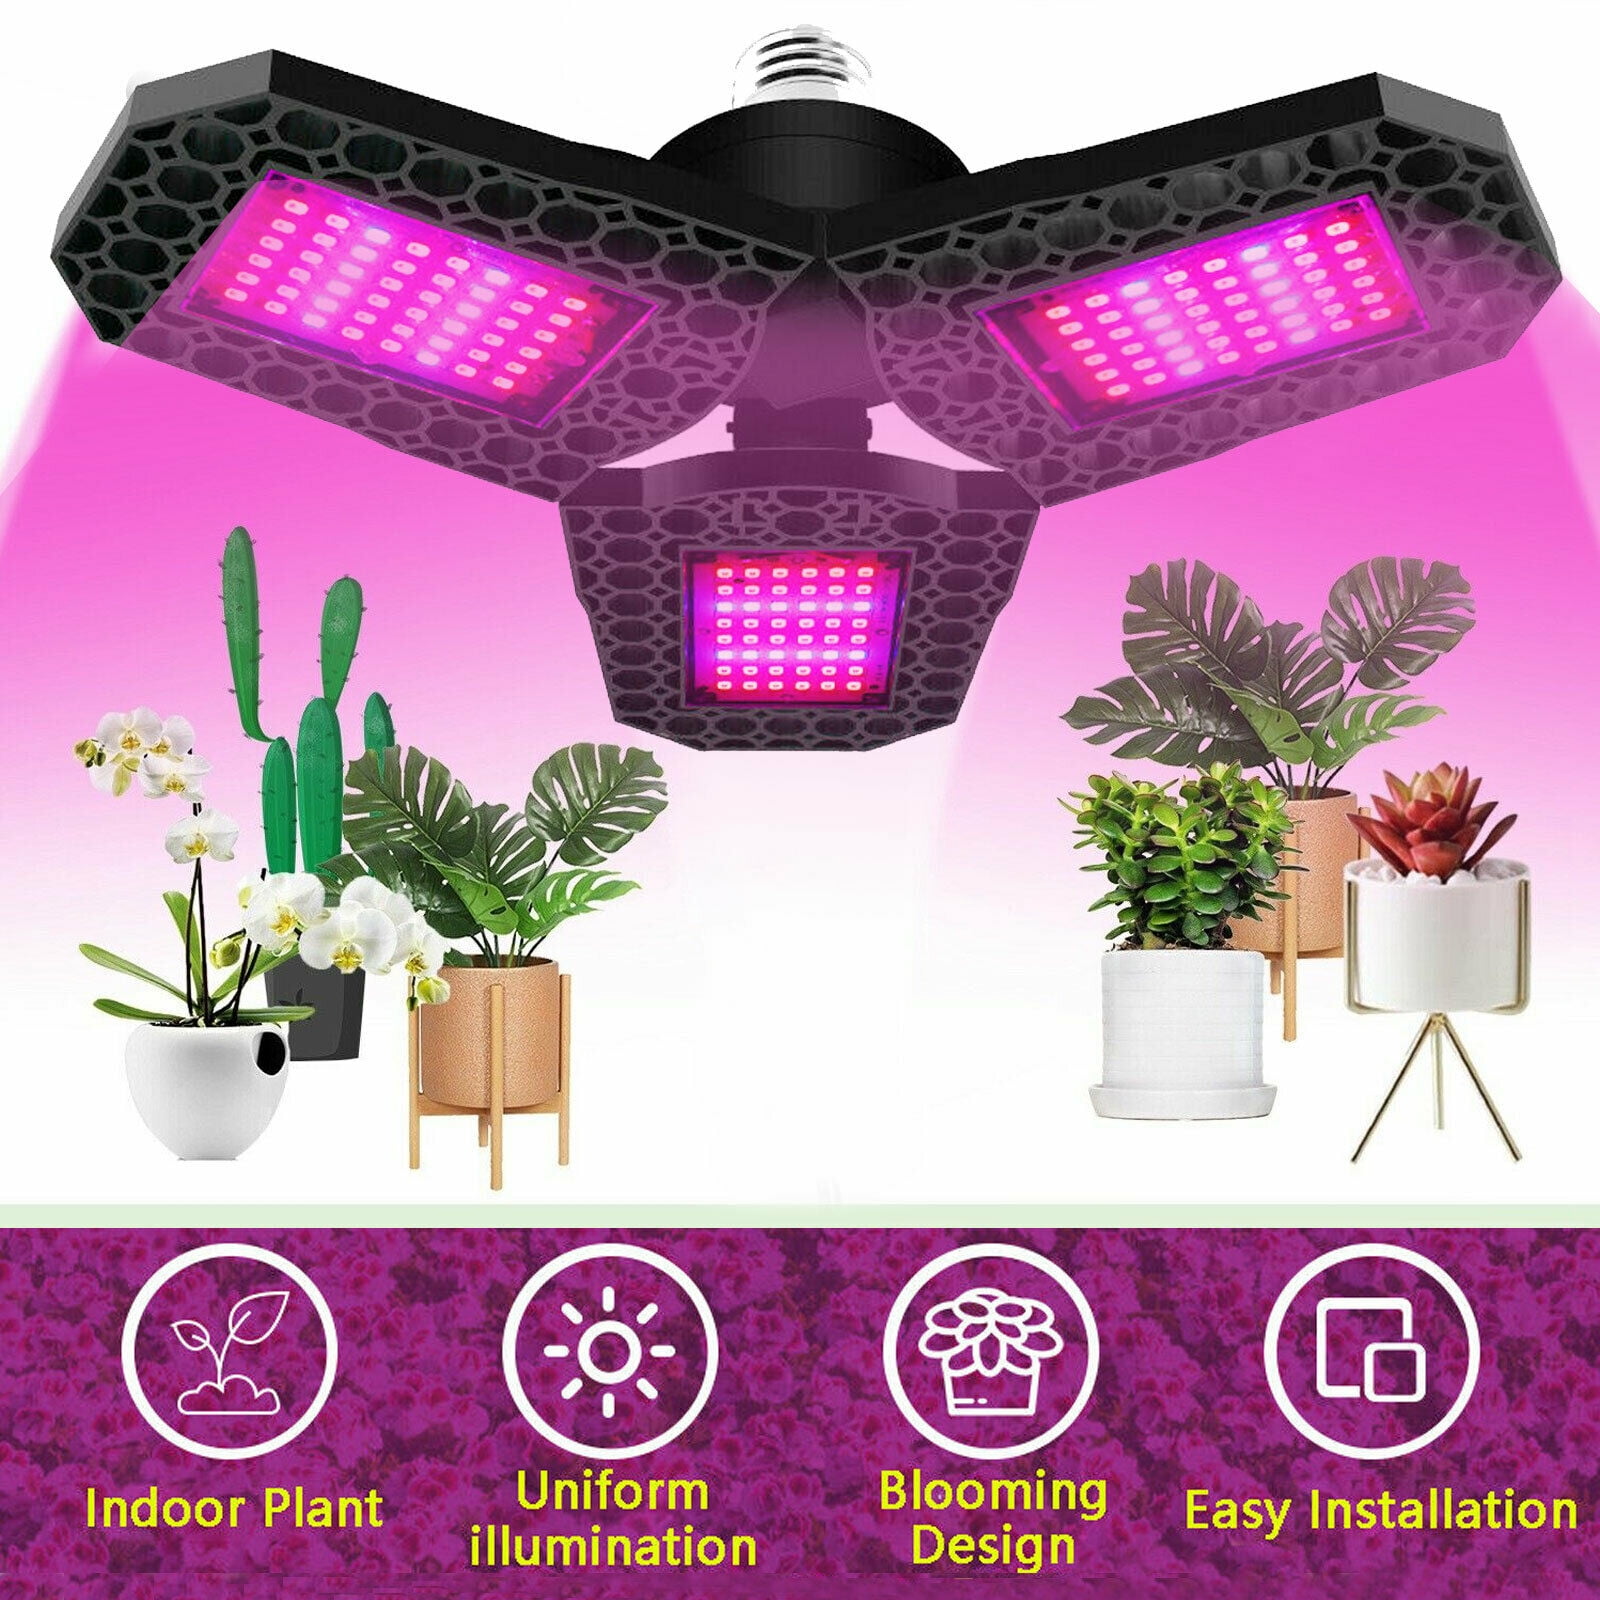 Details about   Full Spectrum 60W 144LED Grow Light Plants Growing Lamp Hydroponics Indoor USA 